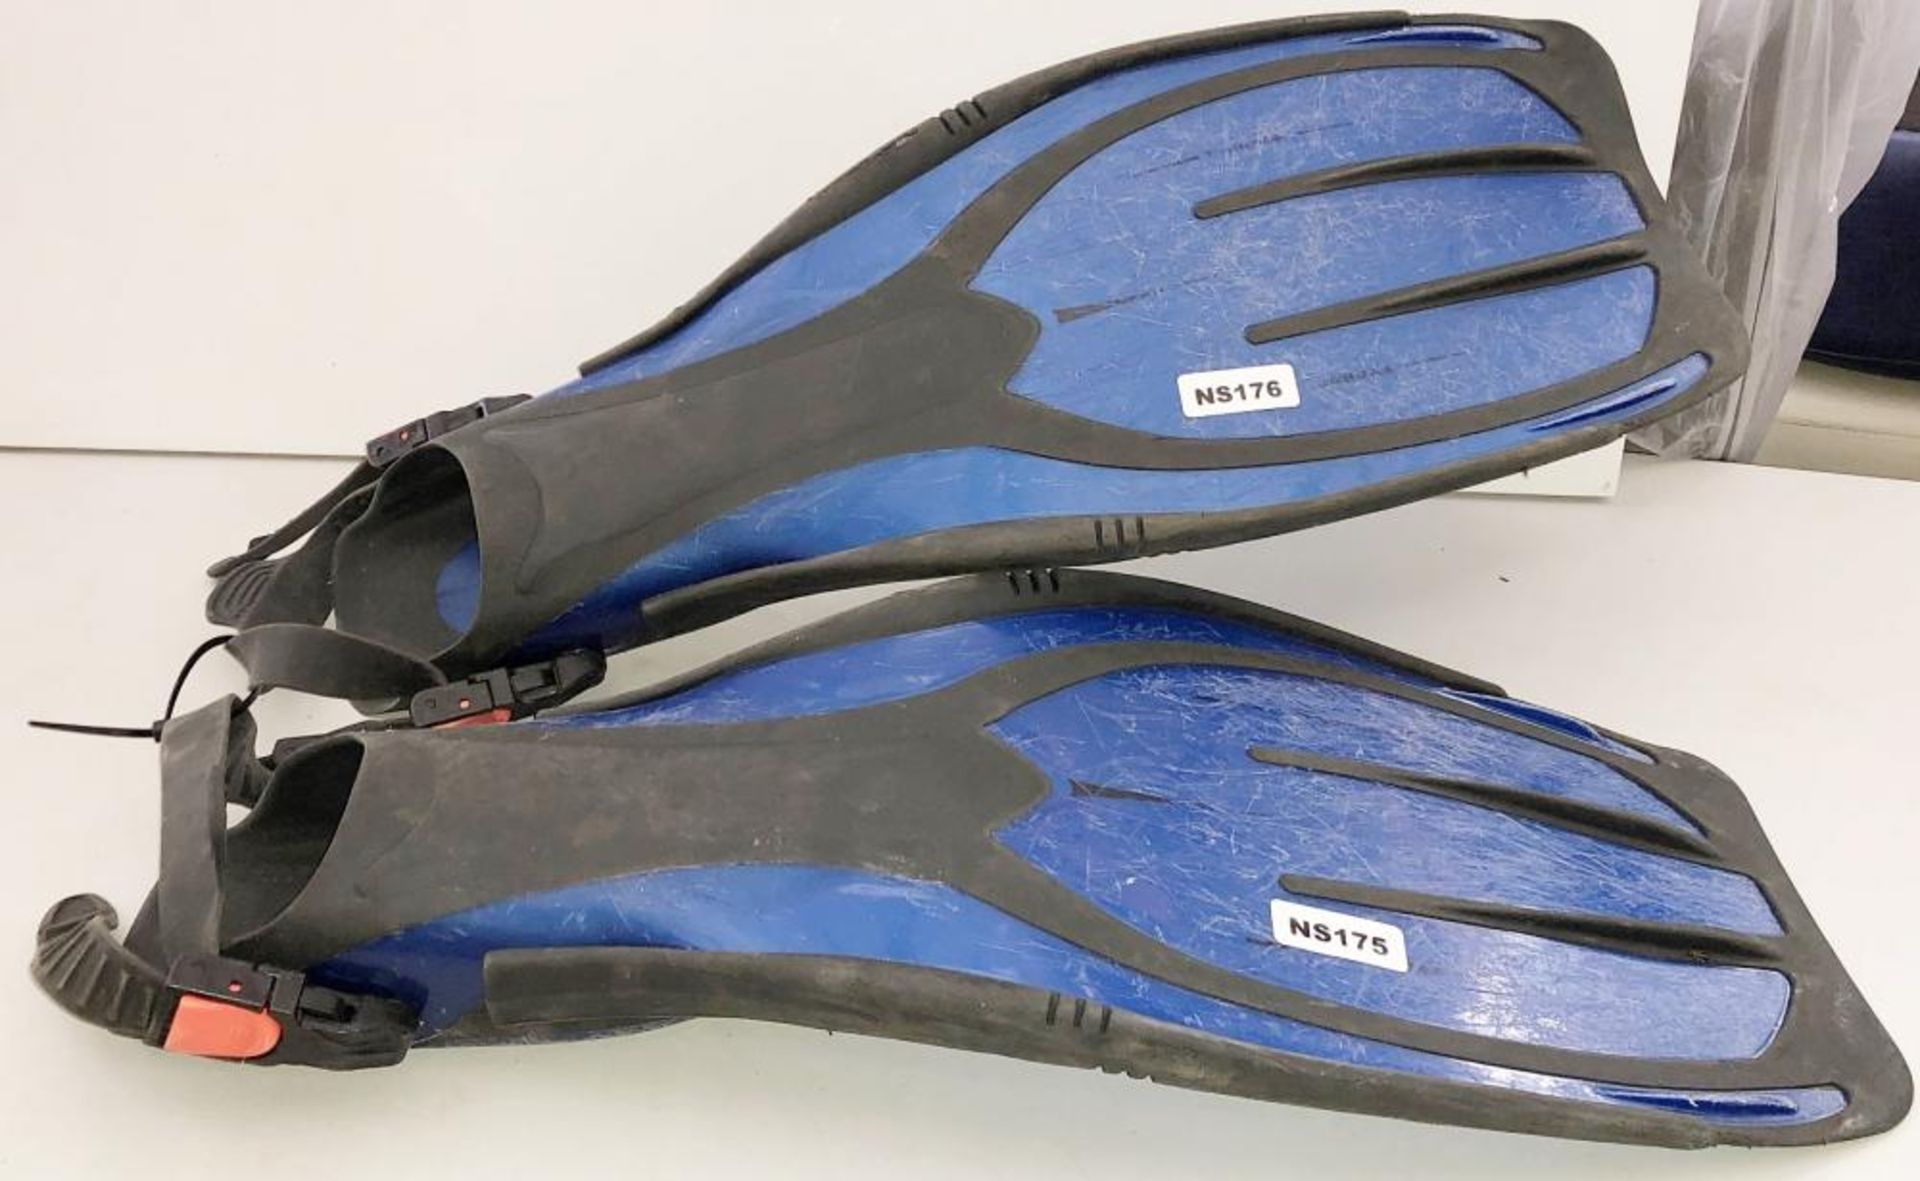 5 x Pairs Of Branded Diving Fins - Ref: NS175, NS176, NS177, NS178, NS179, NS180, NS181, NS182, NS18 - Image 2 of 17